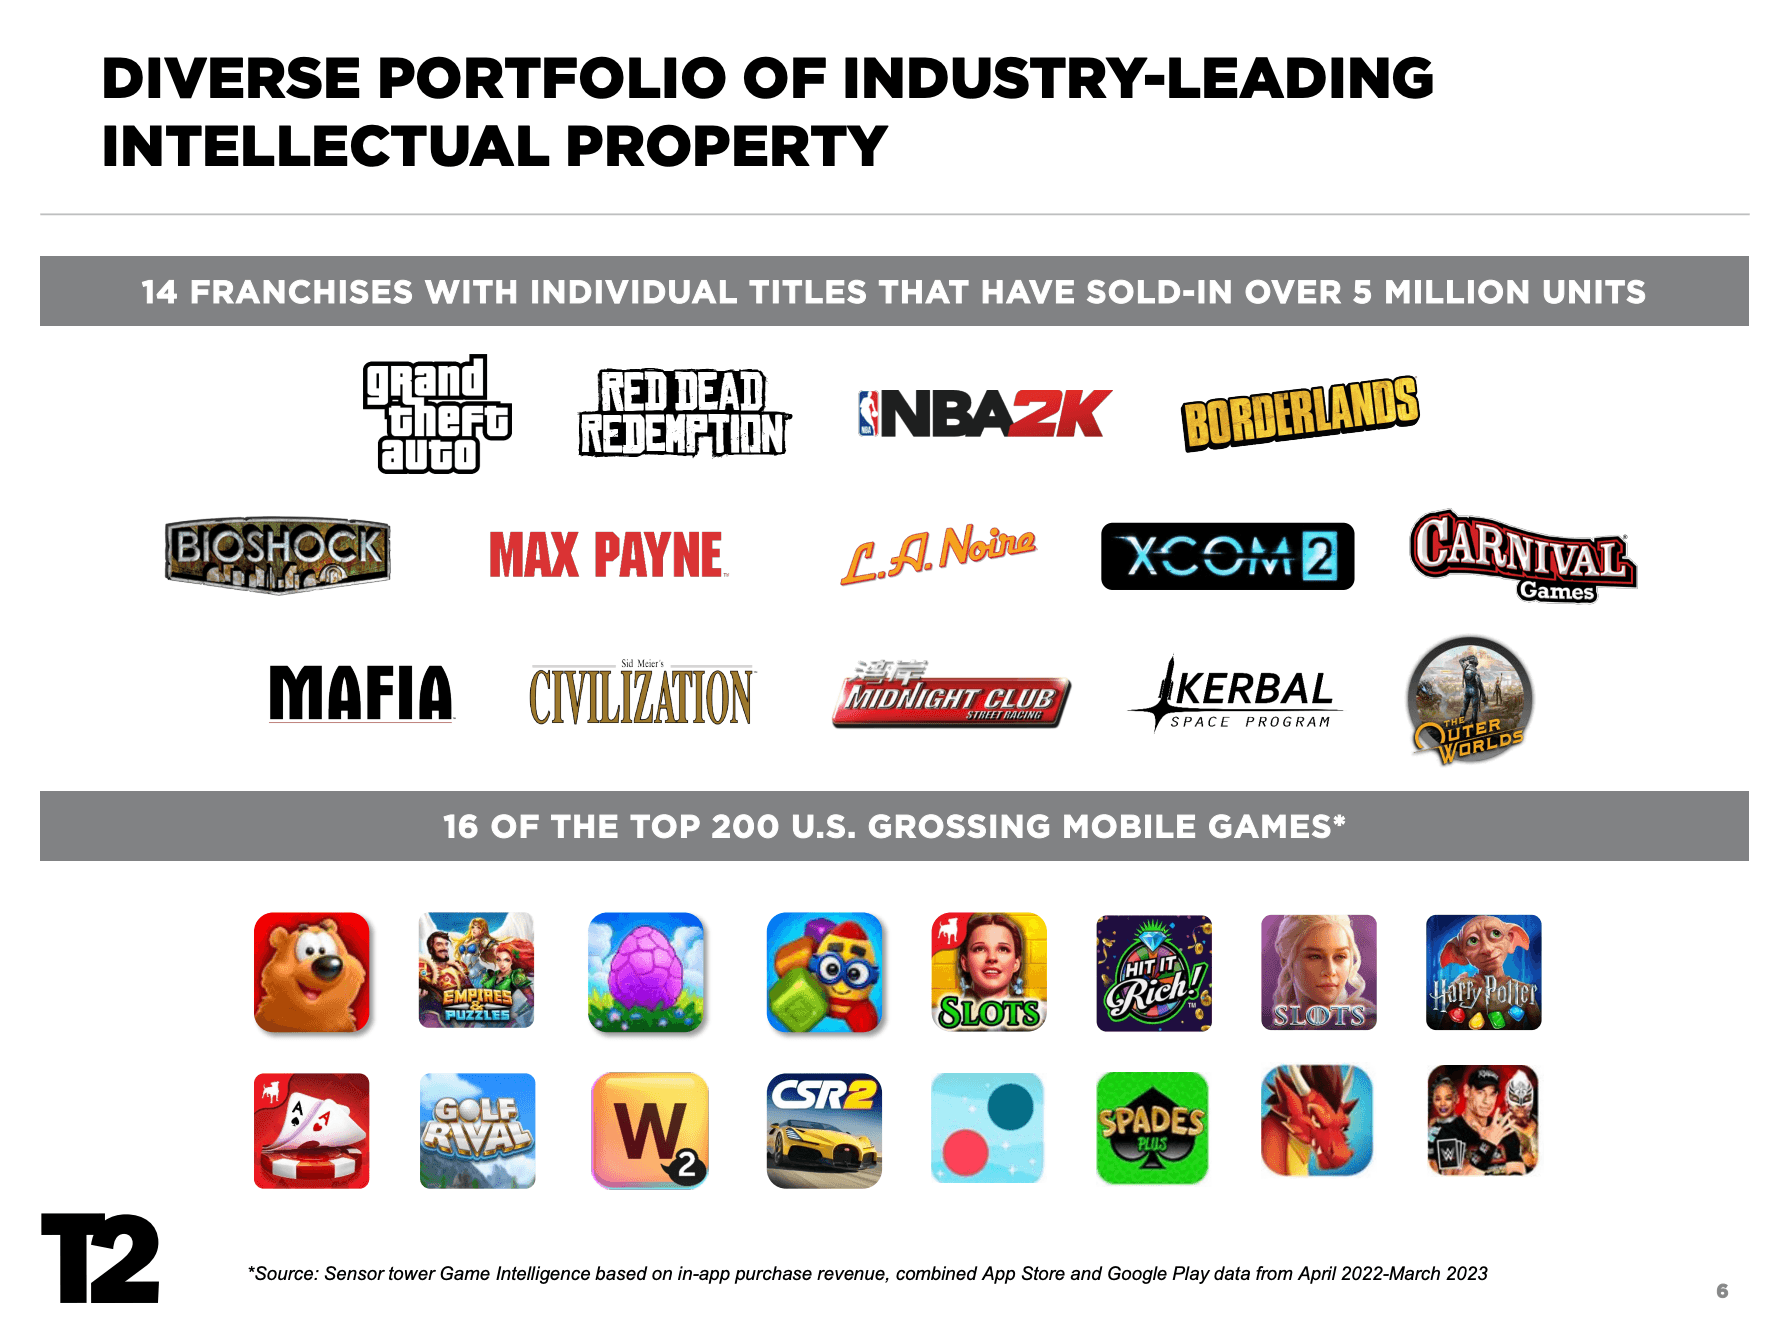 Leading Game Publisher  Take-Two Interactive Software, Inc.